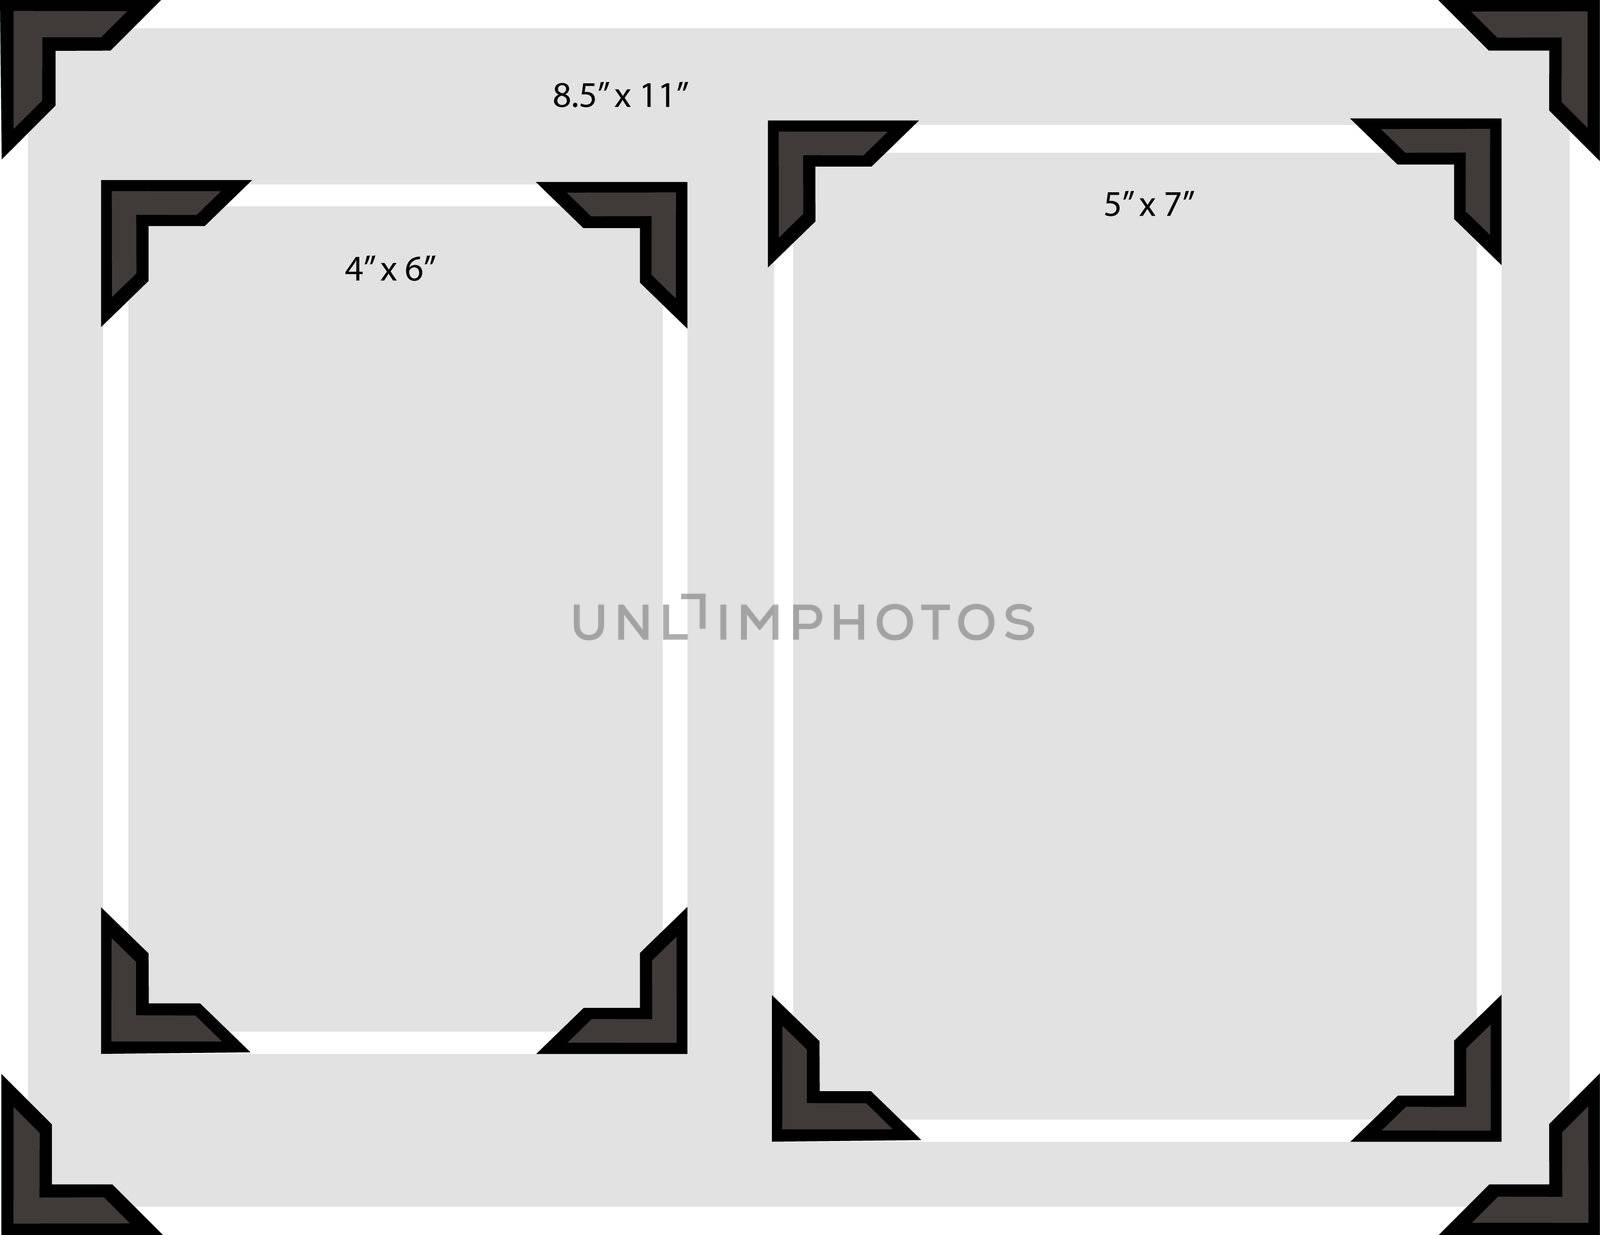 Illustration of a blank photo in three typical sizes with old-fashioned photo corners